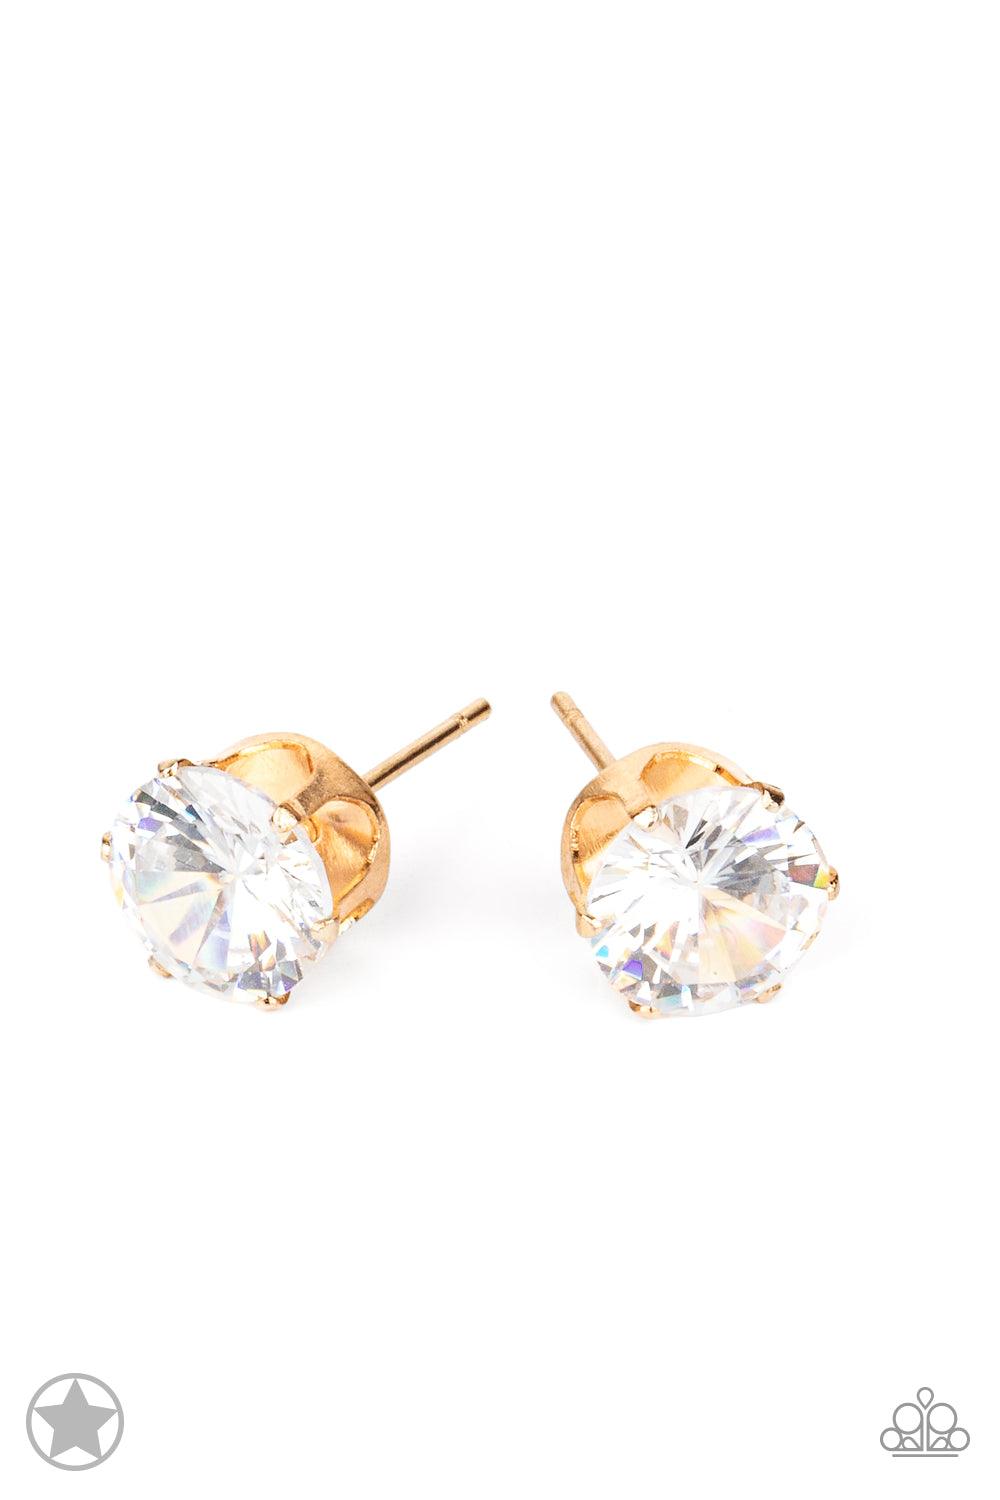 Paparazzi Accessories Just In TIMELESS - Gold A sparkling white rhinestone is nestled inside a classic gold frame for a timeless look. Earring attaches to a standard post fitting. Sold as one pair of post earrings. Jewelry